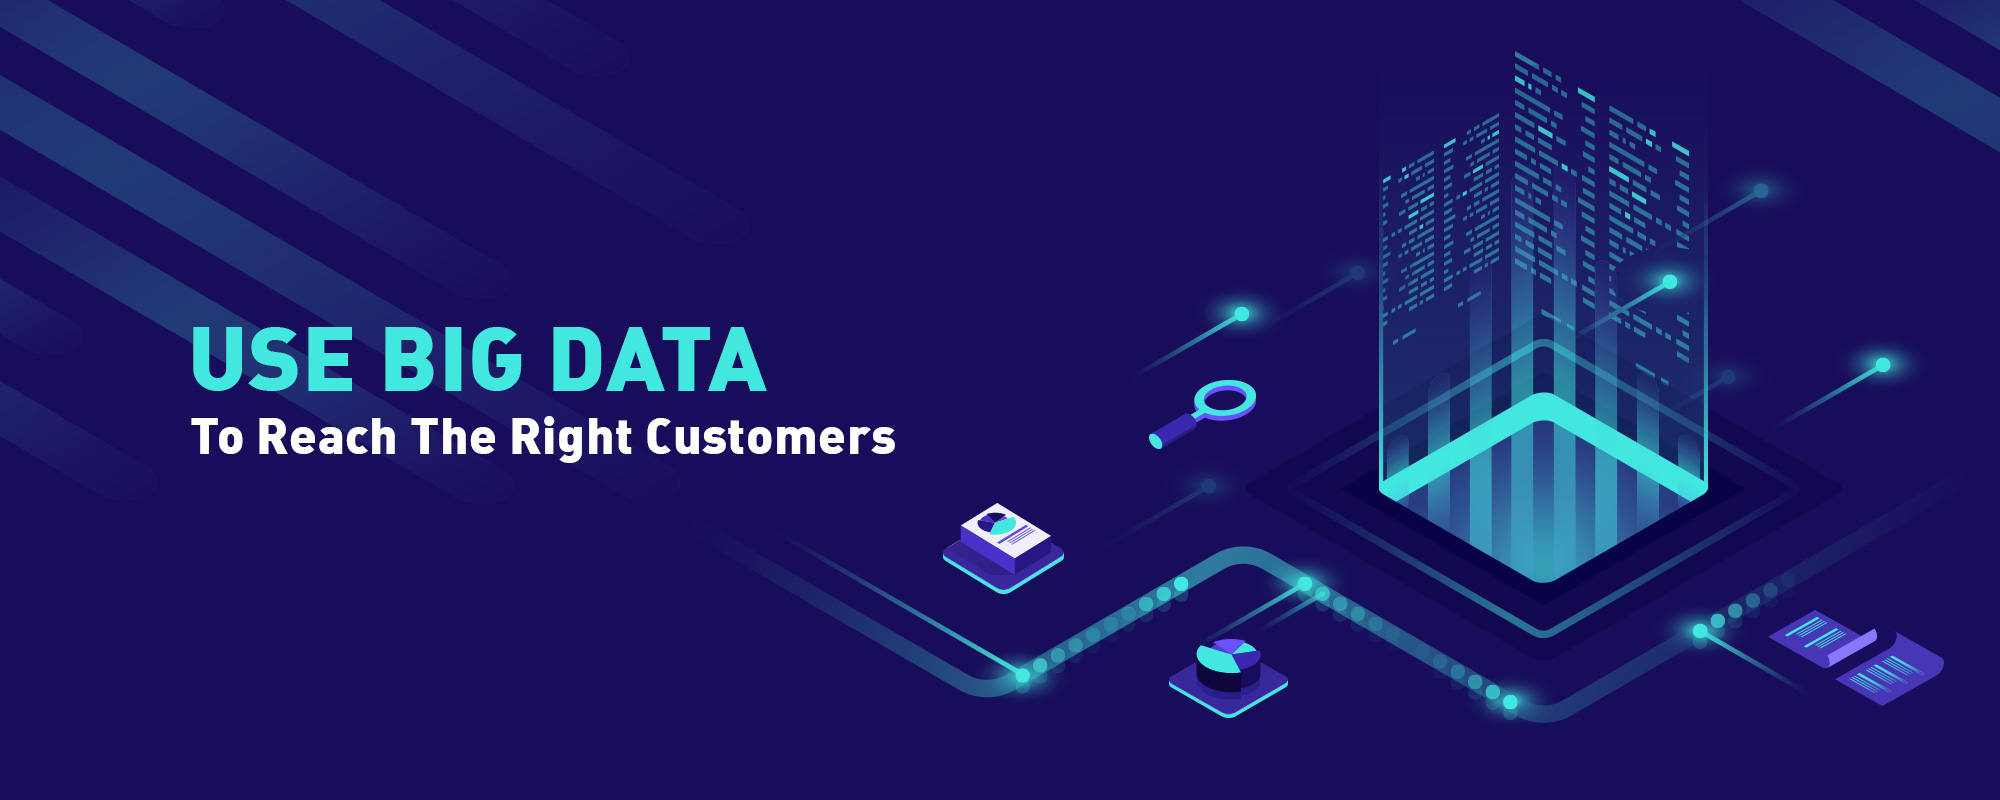 Big Data And Content Marketing Journey – Reach the Right Customer With Your Content